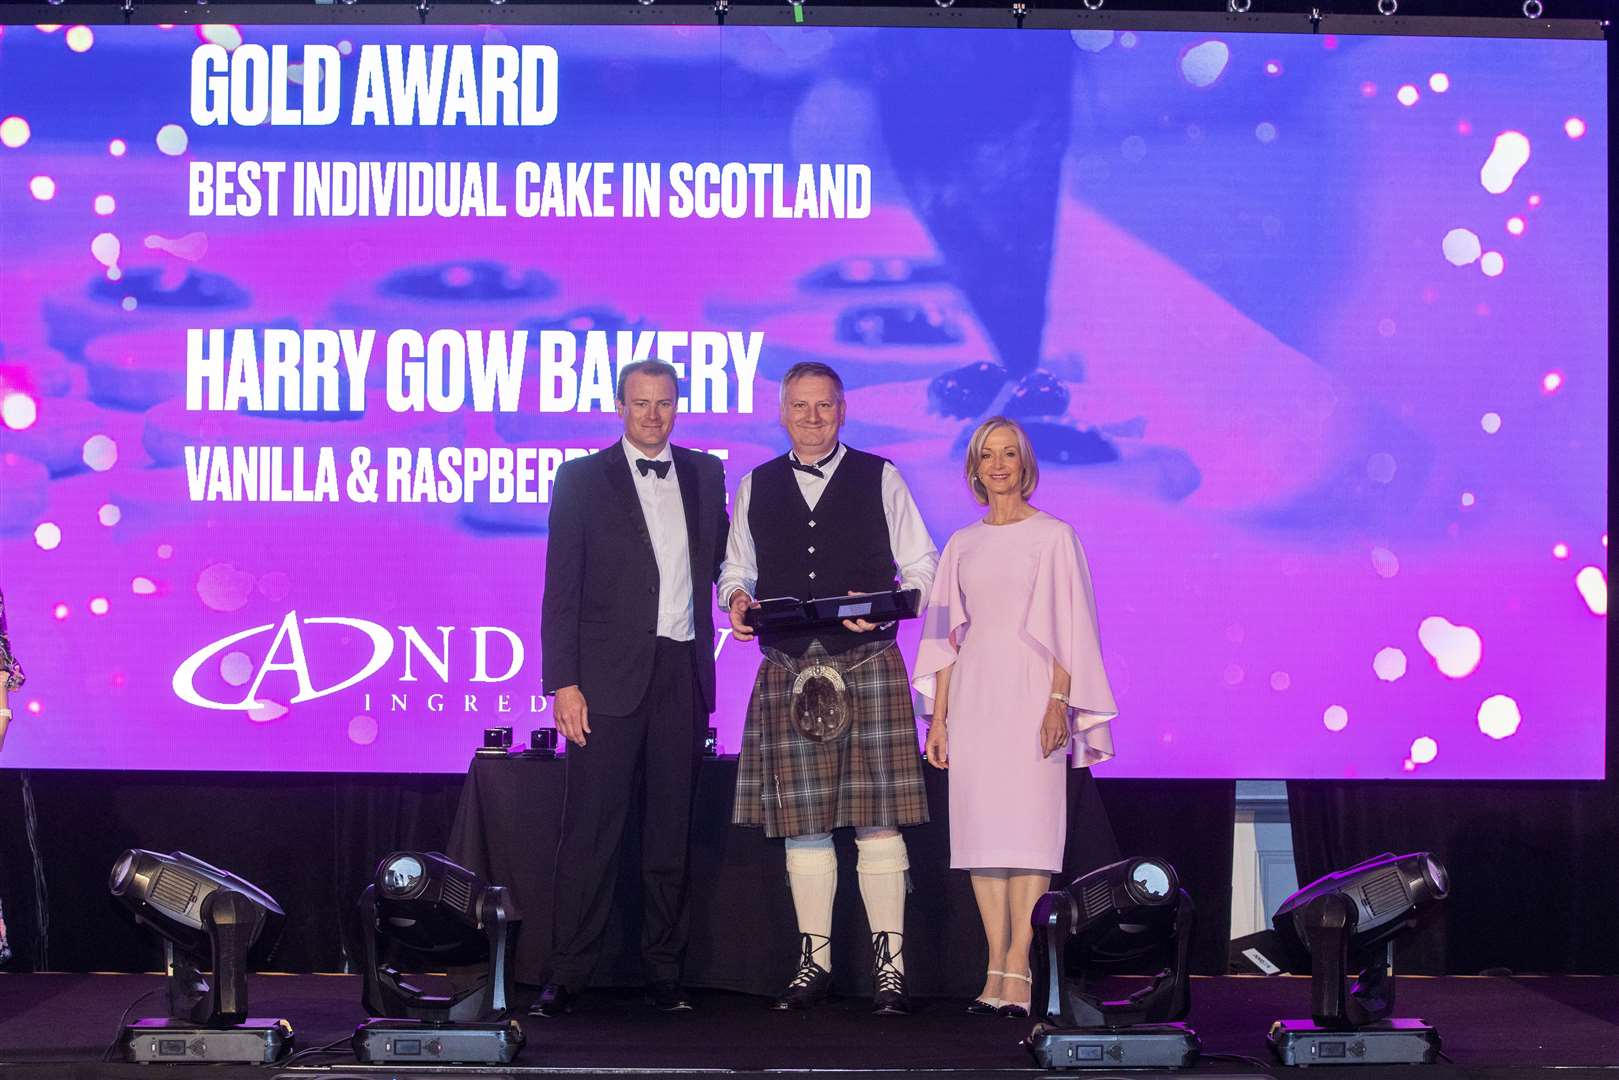 Drew Logie, general manager of Harry Gow (centre) accepts the award for Best Individual Cake, presented by John Graham, managing director of Andrew Ingredients (left) and Scottish Bakers ambassador Mich Turner MBE.